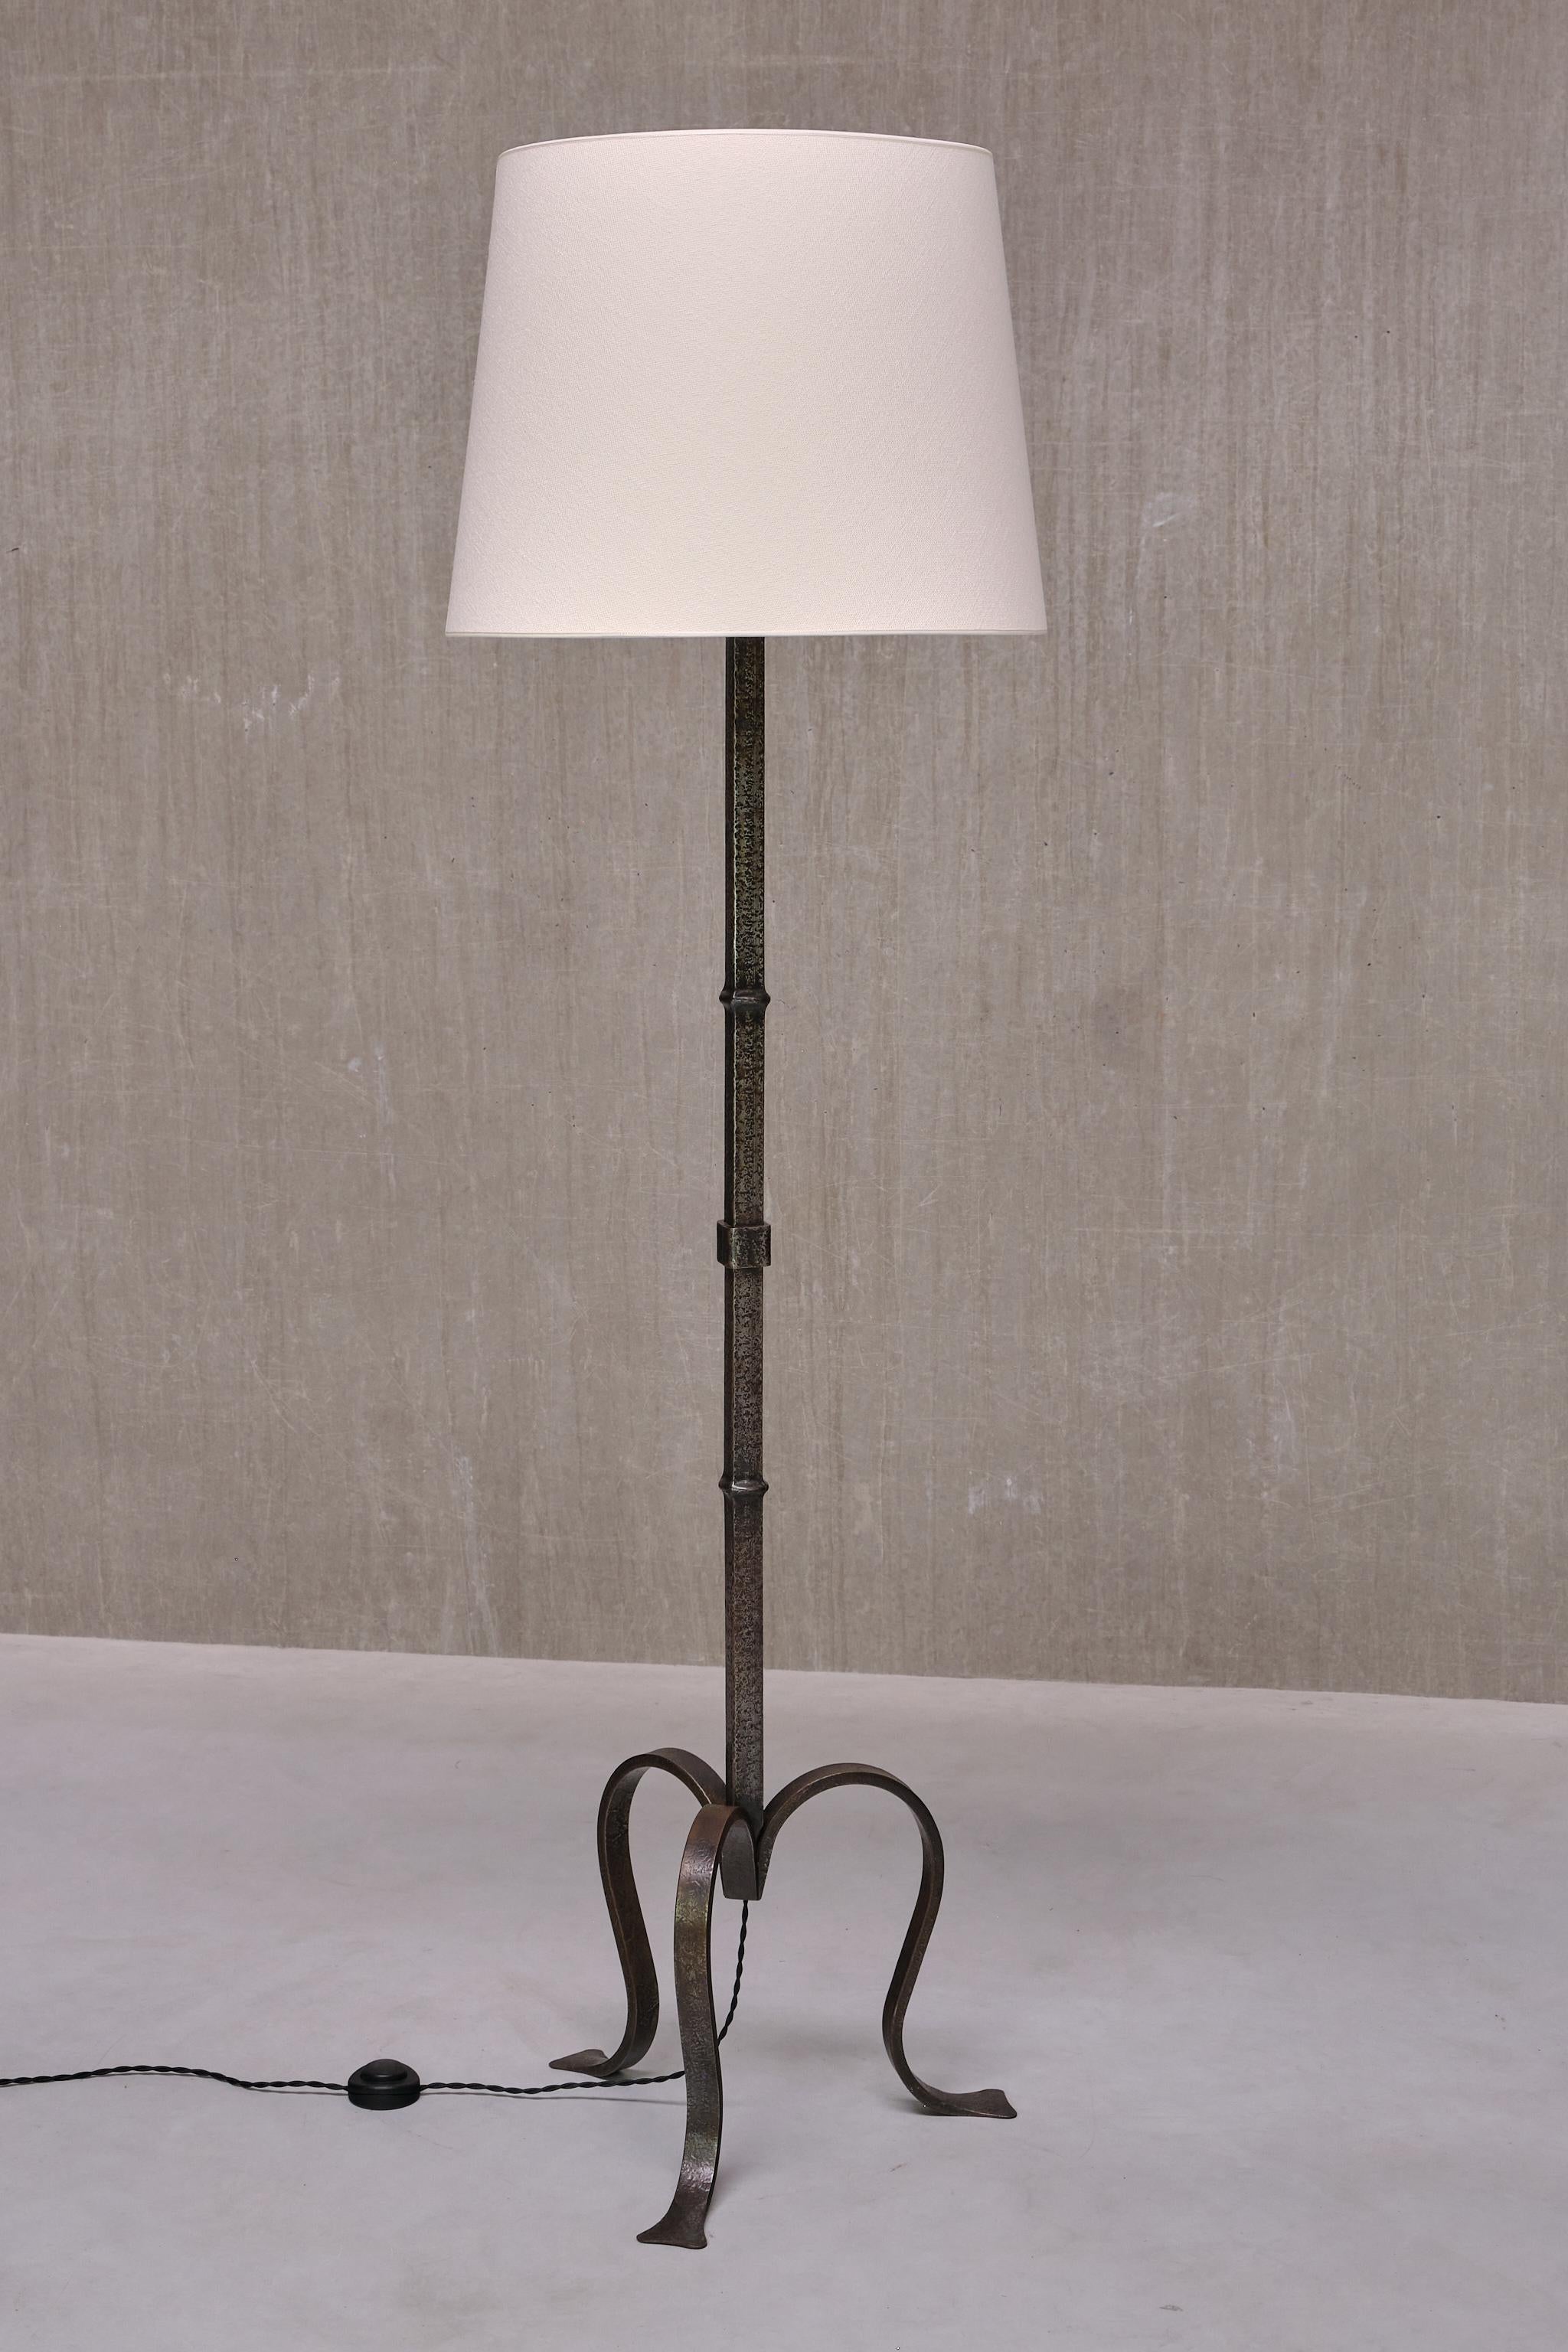 Fabric Sculptural French Modern Three Legged Floor Lamp in Wrought Iron, 1950s For Sale